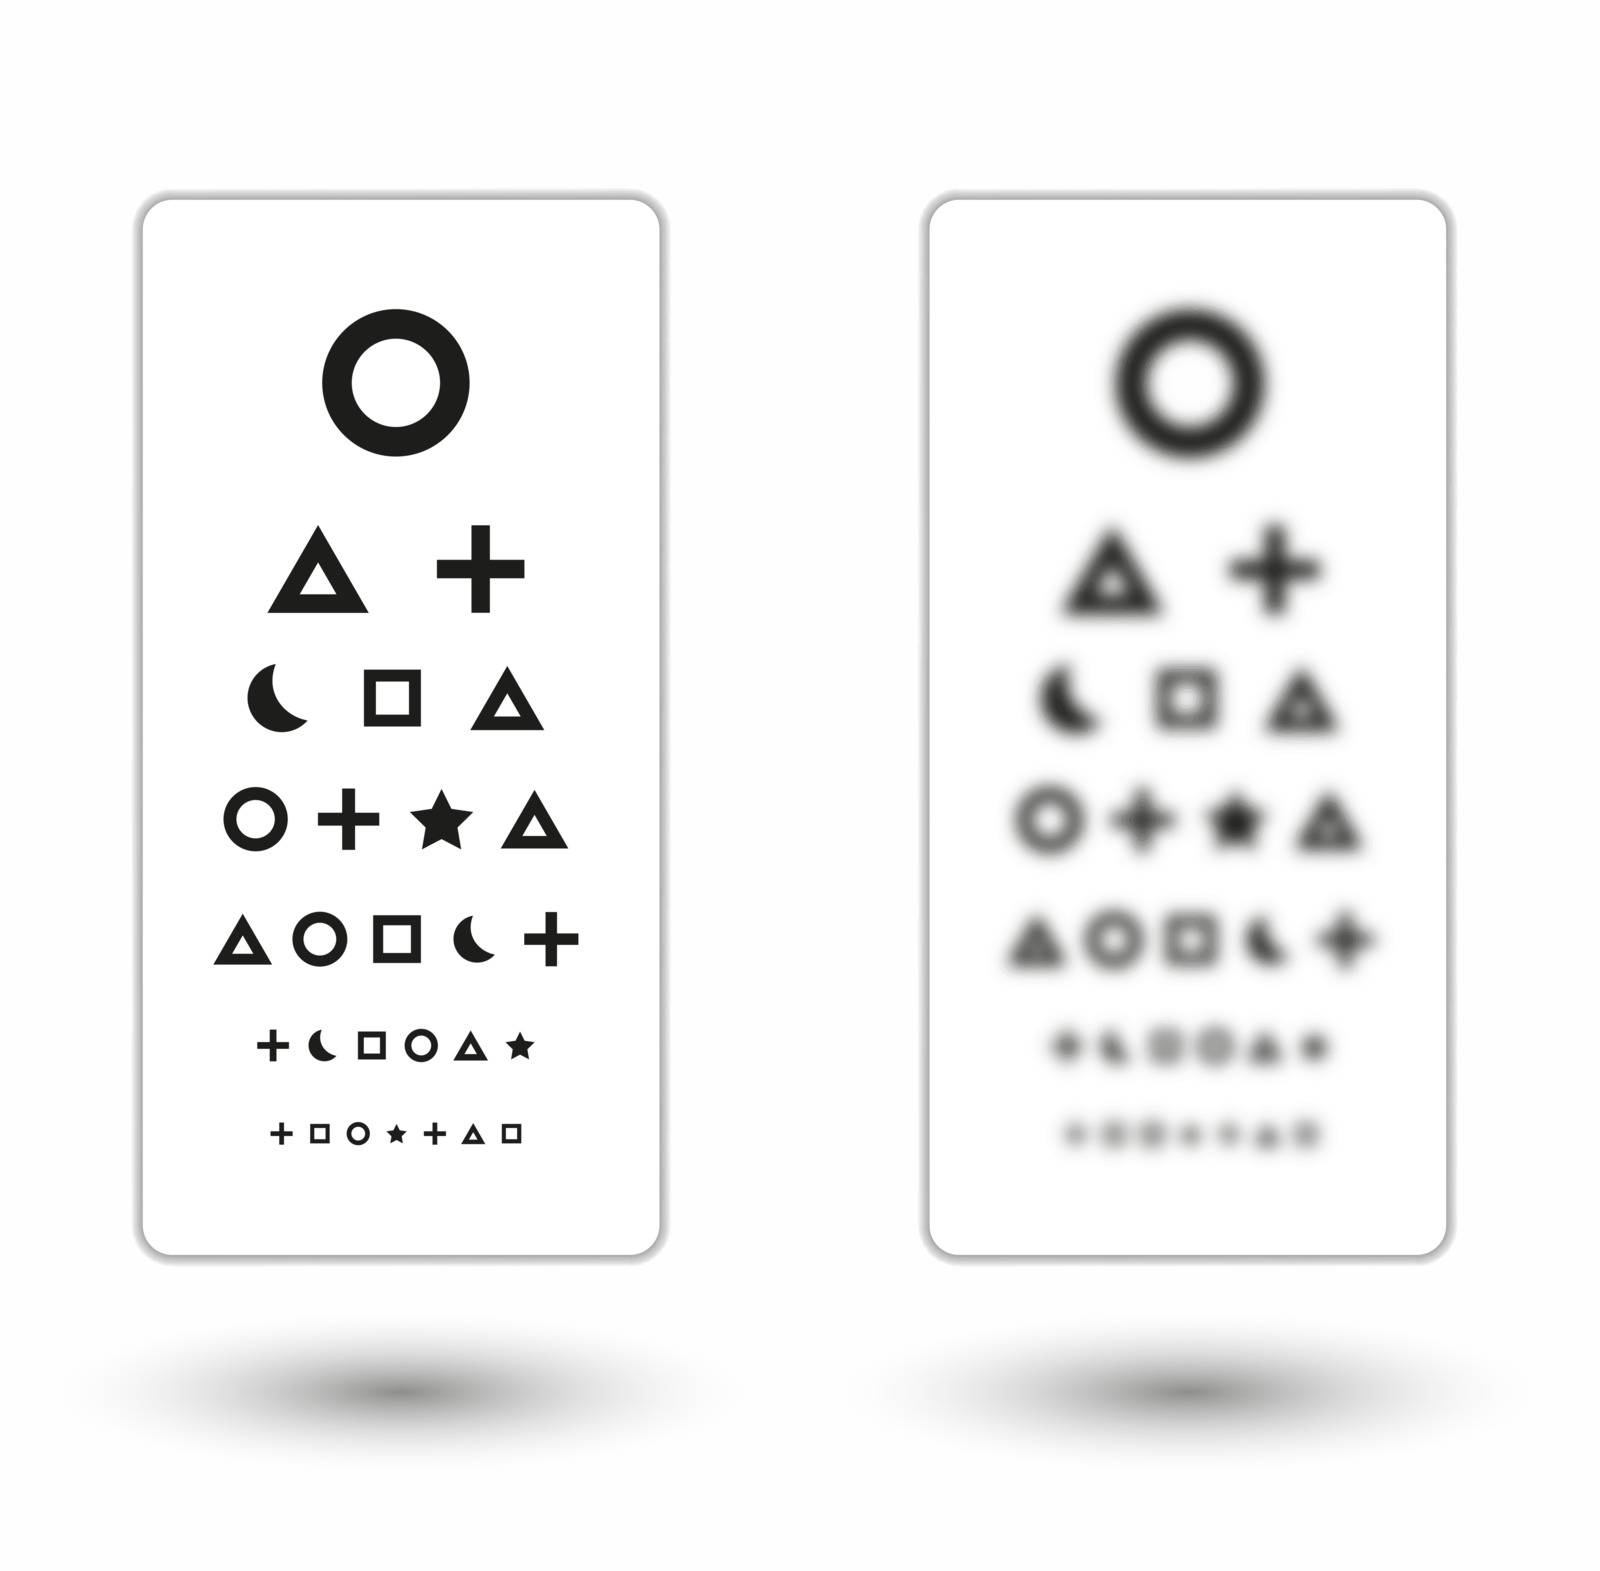 sharp and unsharp snellen chart with symbols for children on white background